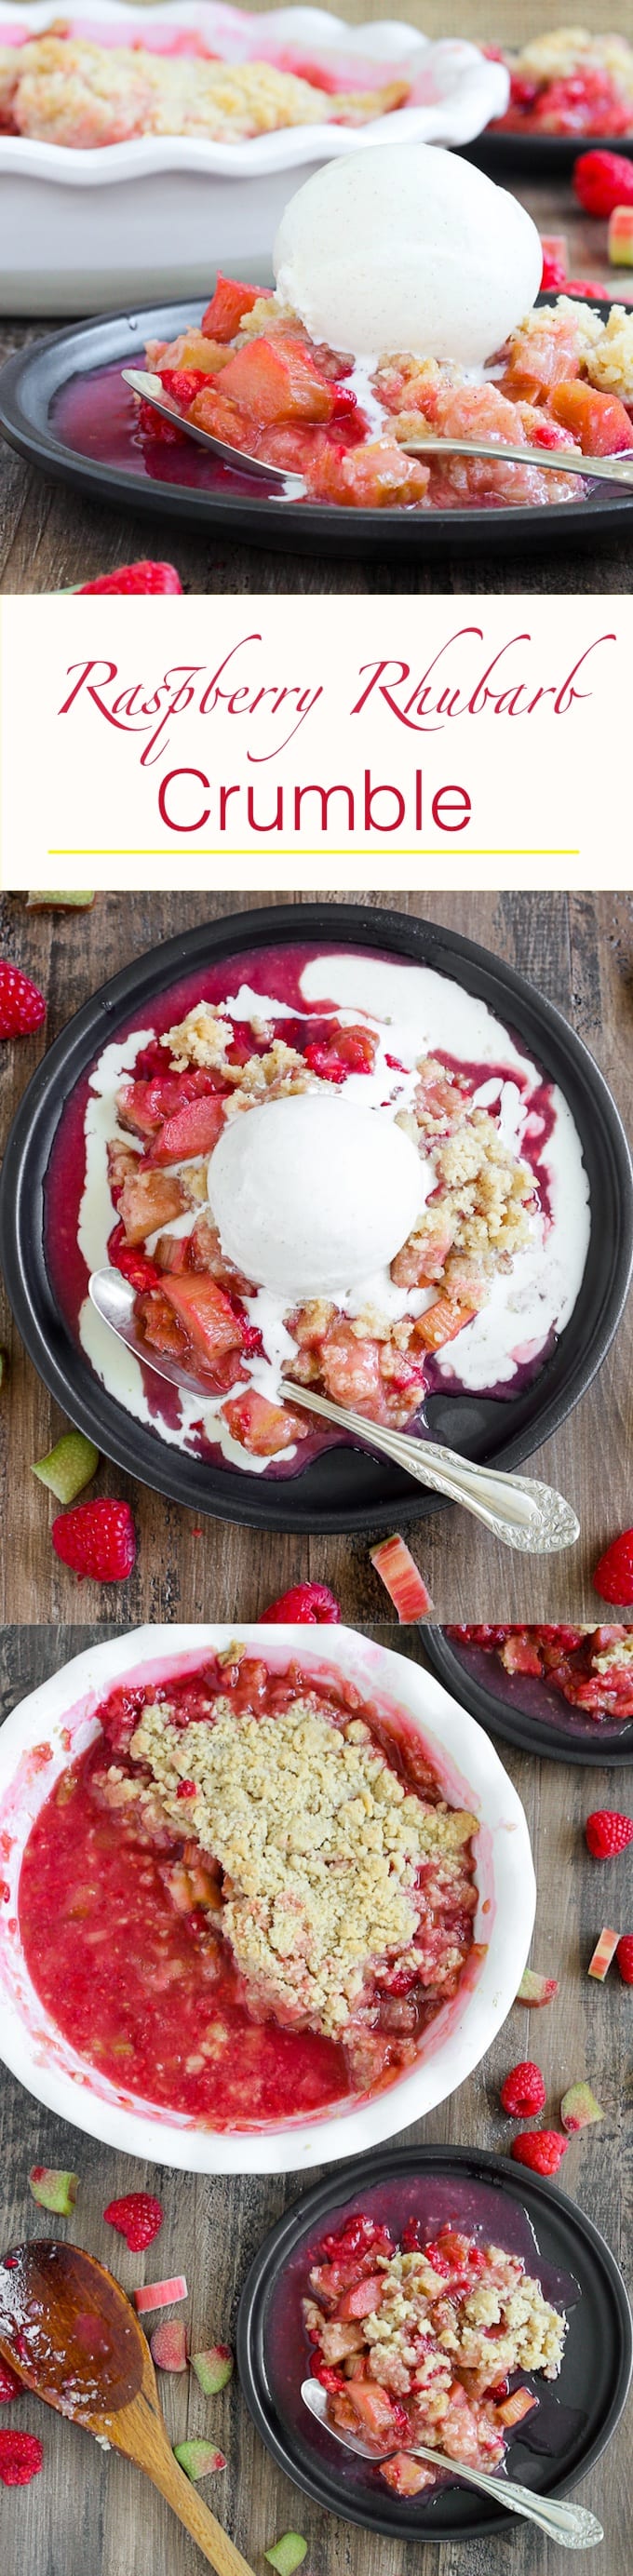 Grandmas Raspberry Rhubarb Crumble is the perfect balance of tart and sweet! The rhubarb is tender and still has a little bit of sour bite. And the cinnamon crumble on top…don’t even get me started! It is the best crumble I’ve ever had!